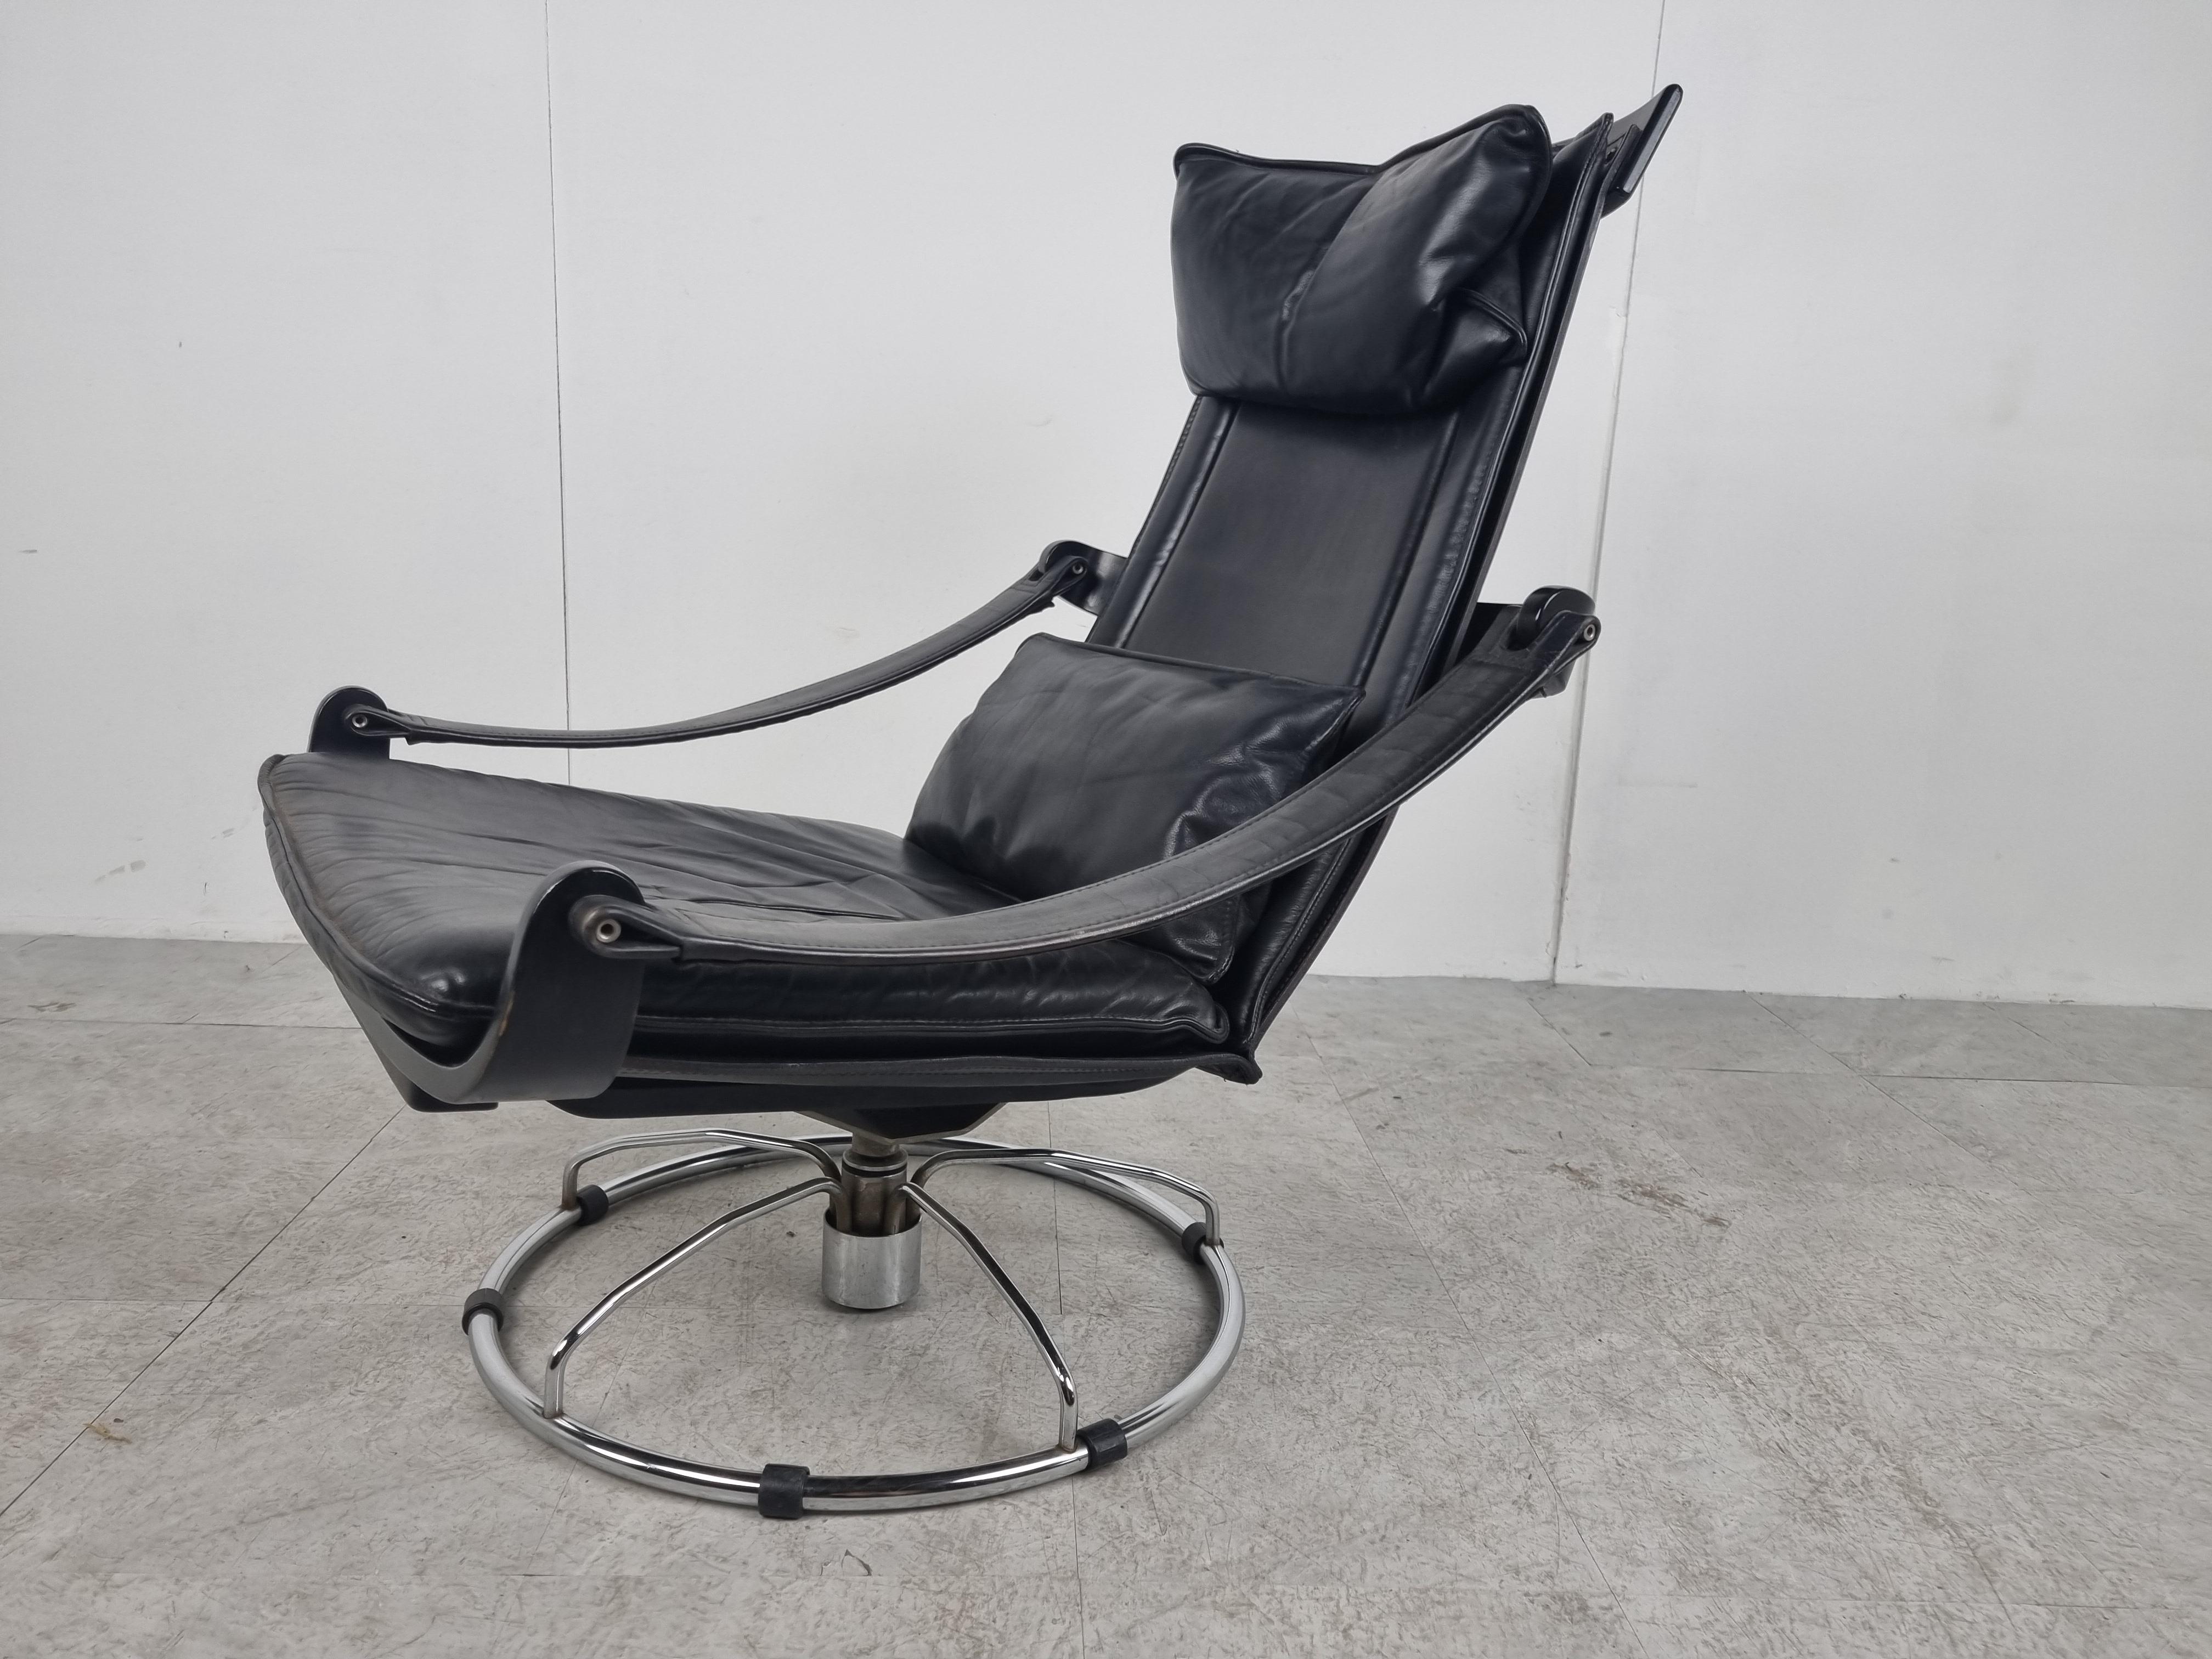 Vintage leather swivel lounge chair designed by Ake Fribytter for Nelo Möbel.

The chair features a black bentwood frame on a chromed bases and has sling leather armrests.

The thick leather cushions provide plenty of comfort.

Good condition with